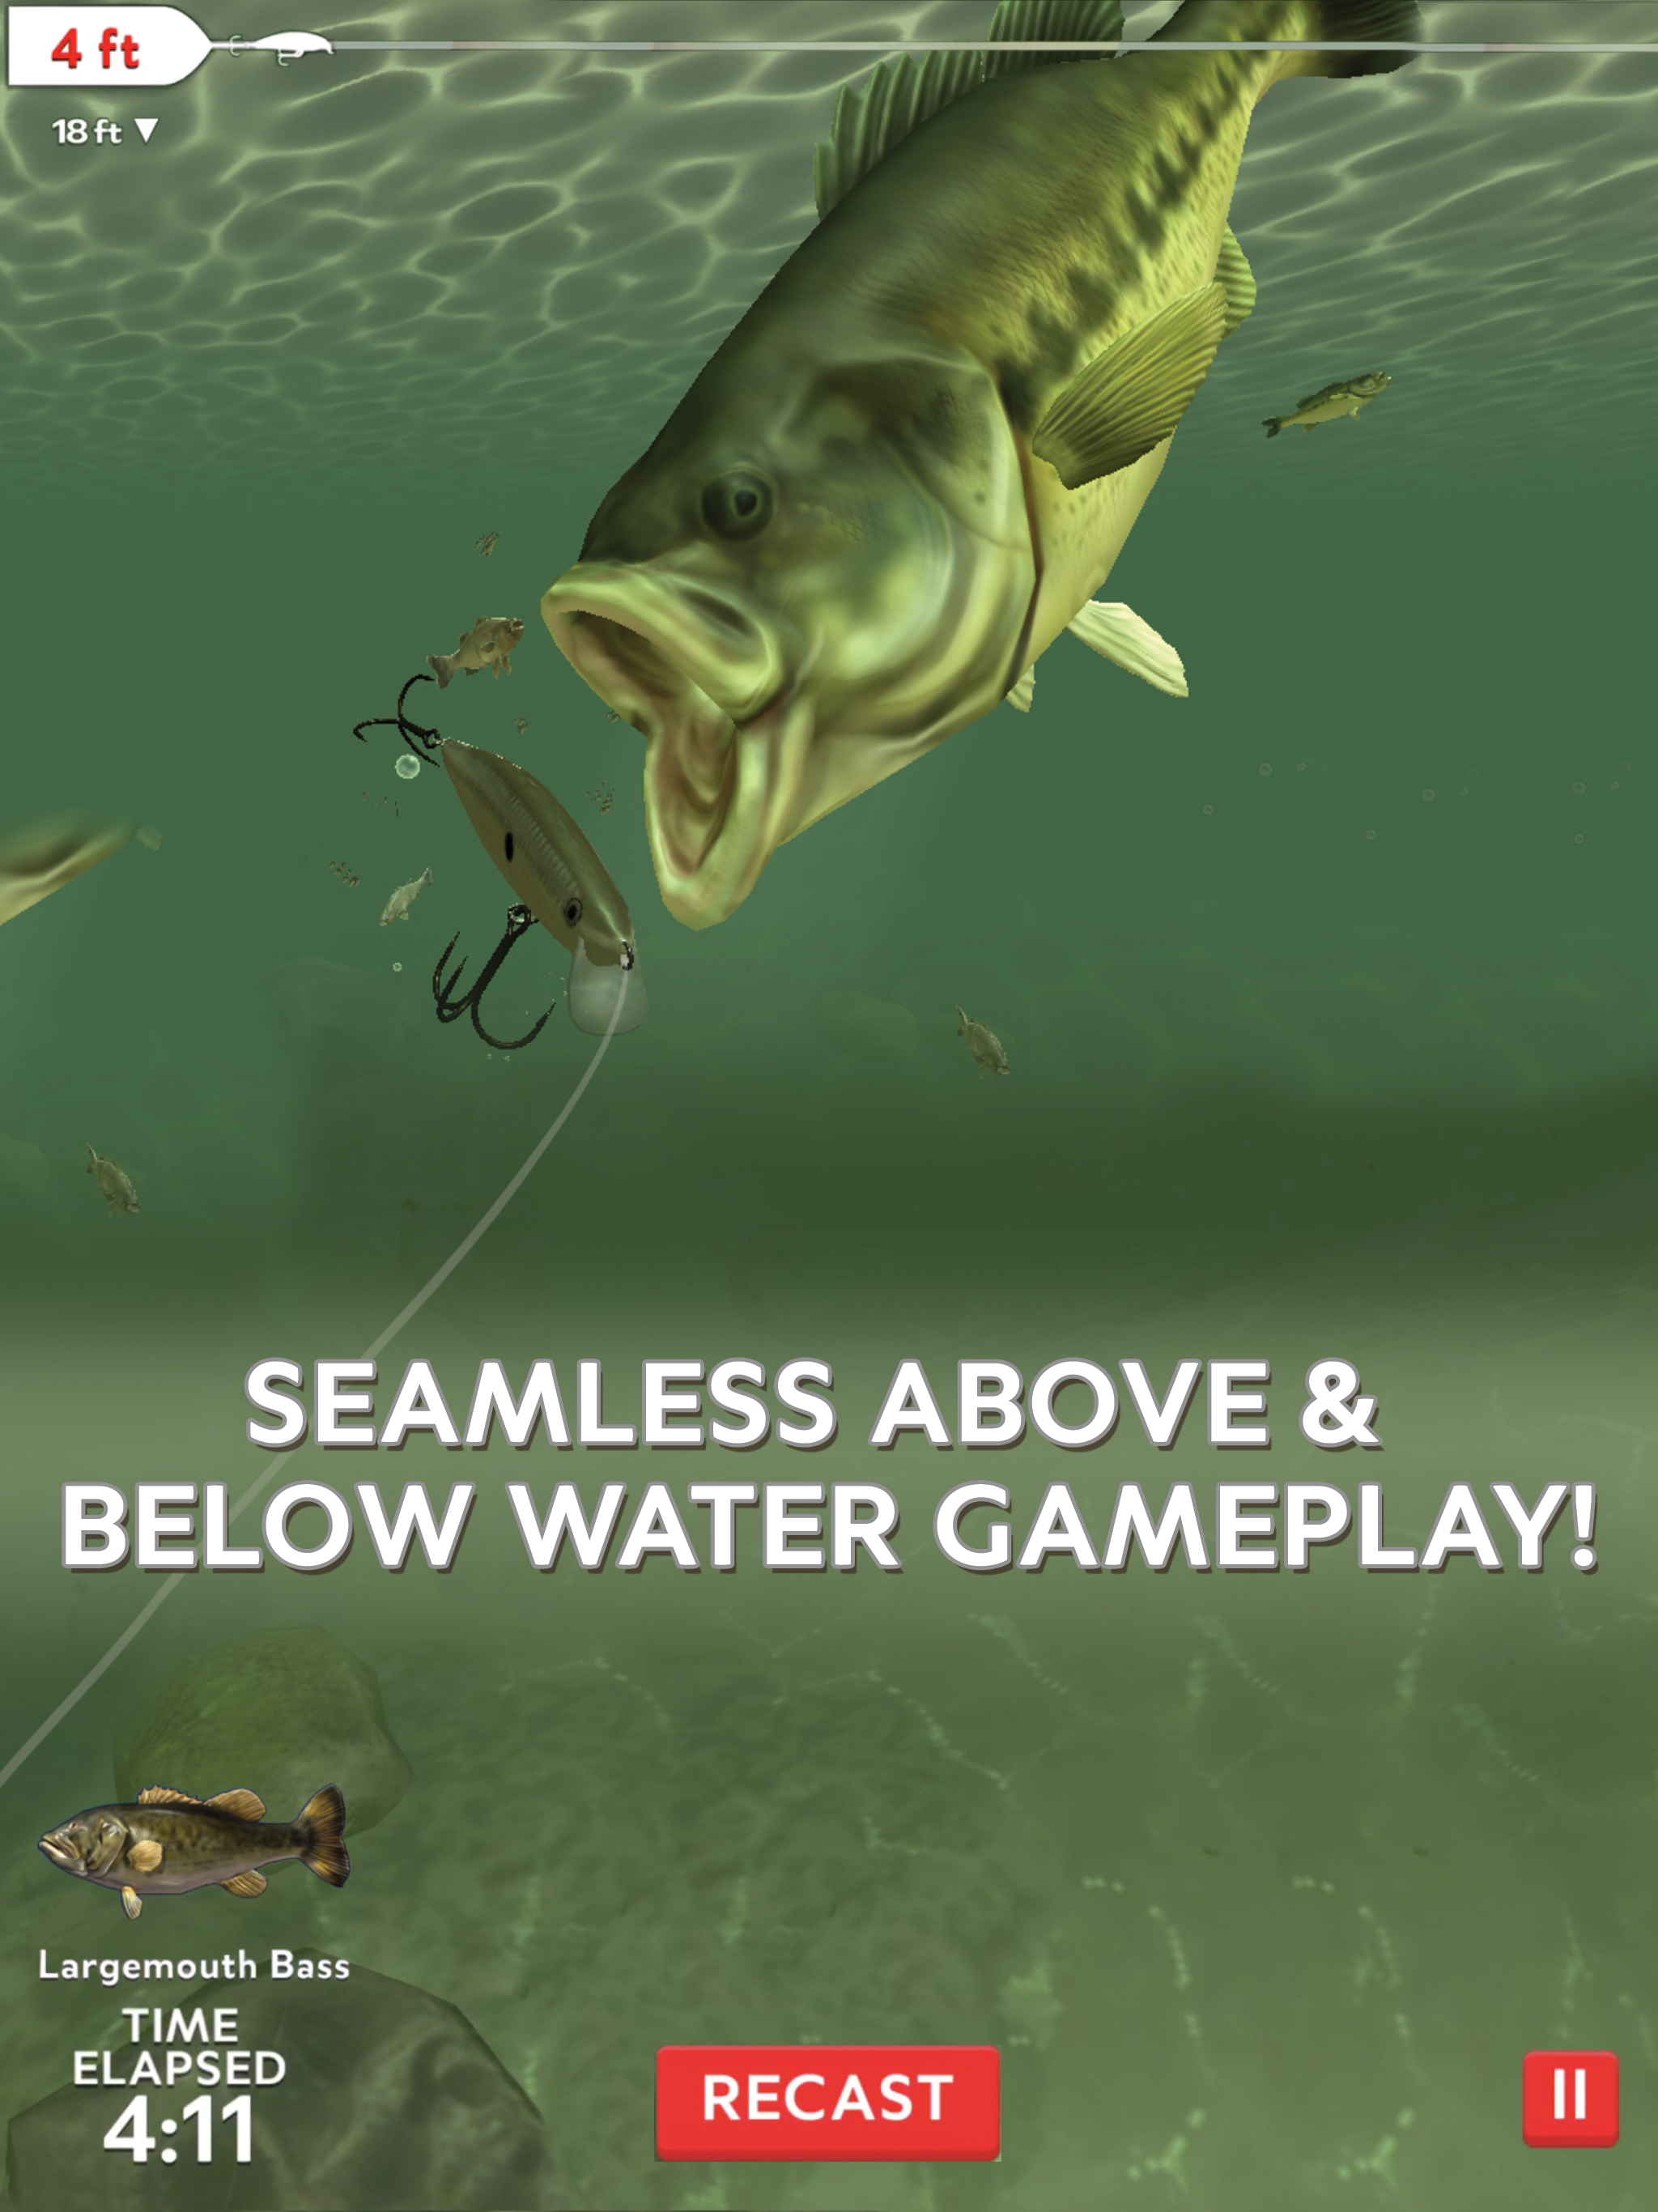 The Rapala Fishing Daily Catch - - Concrete Software, Inc